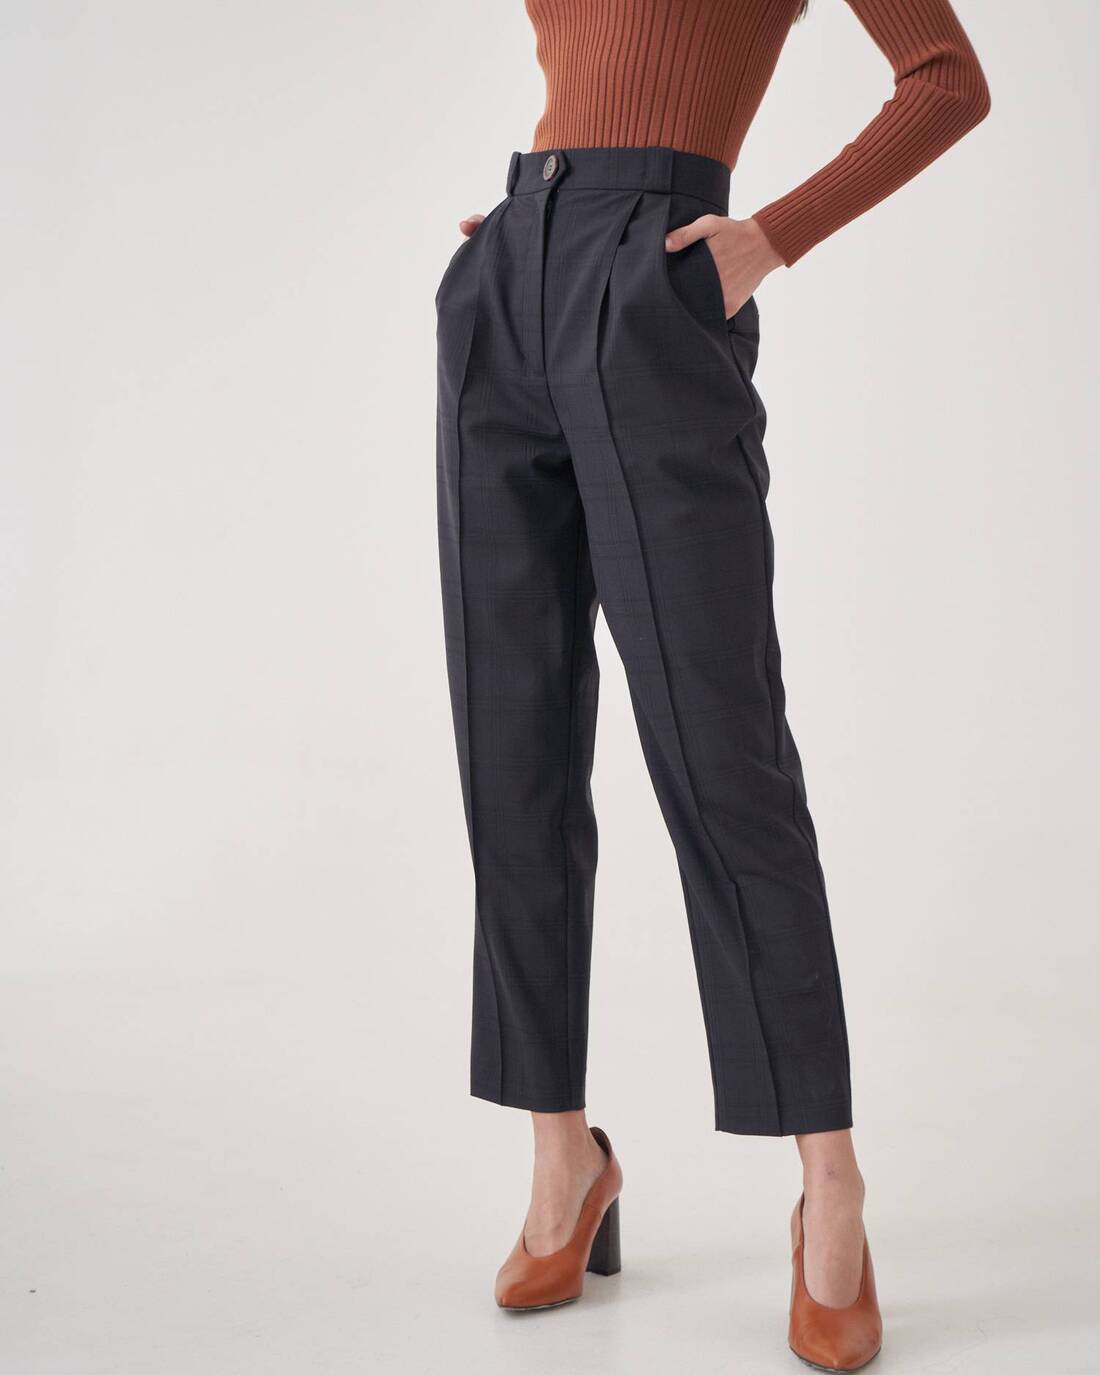 Cigarette pants with seams